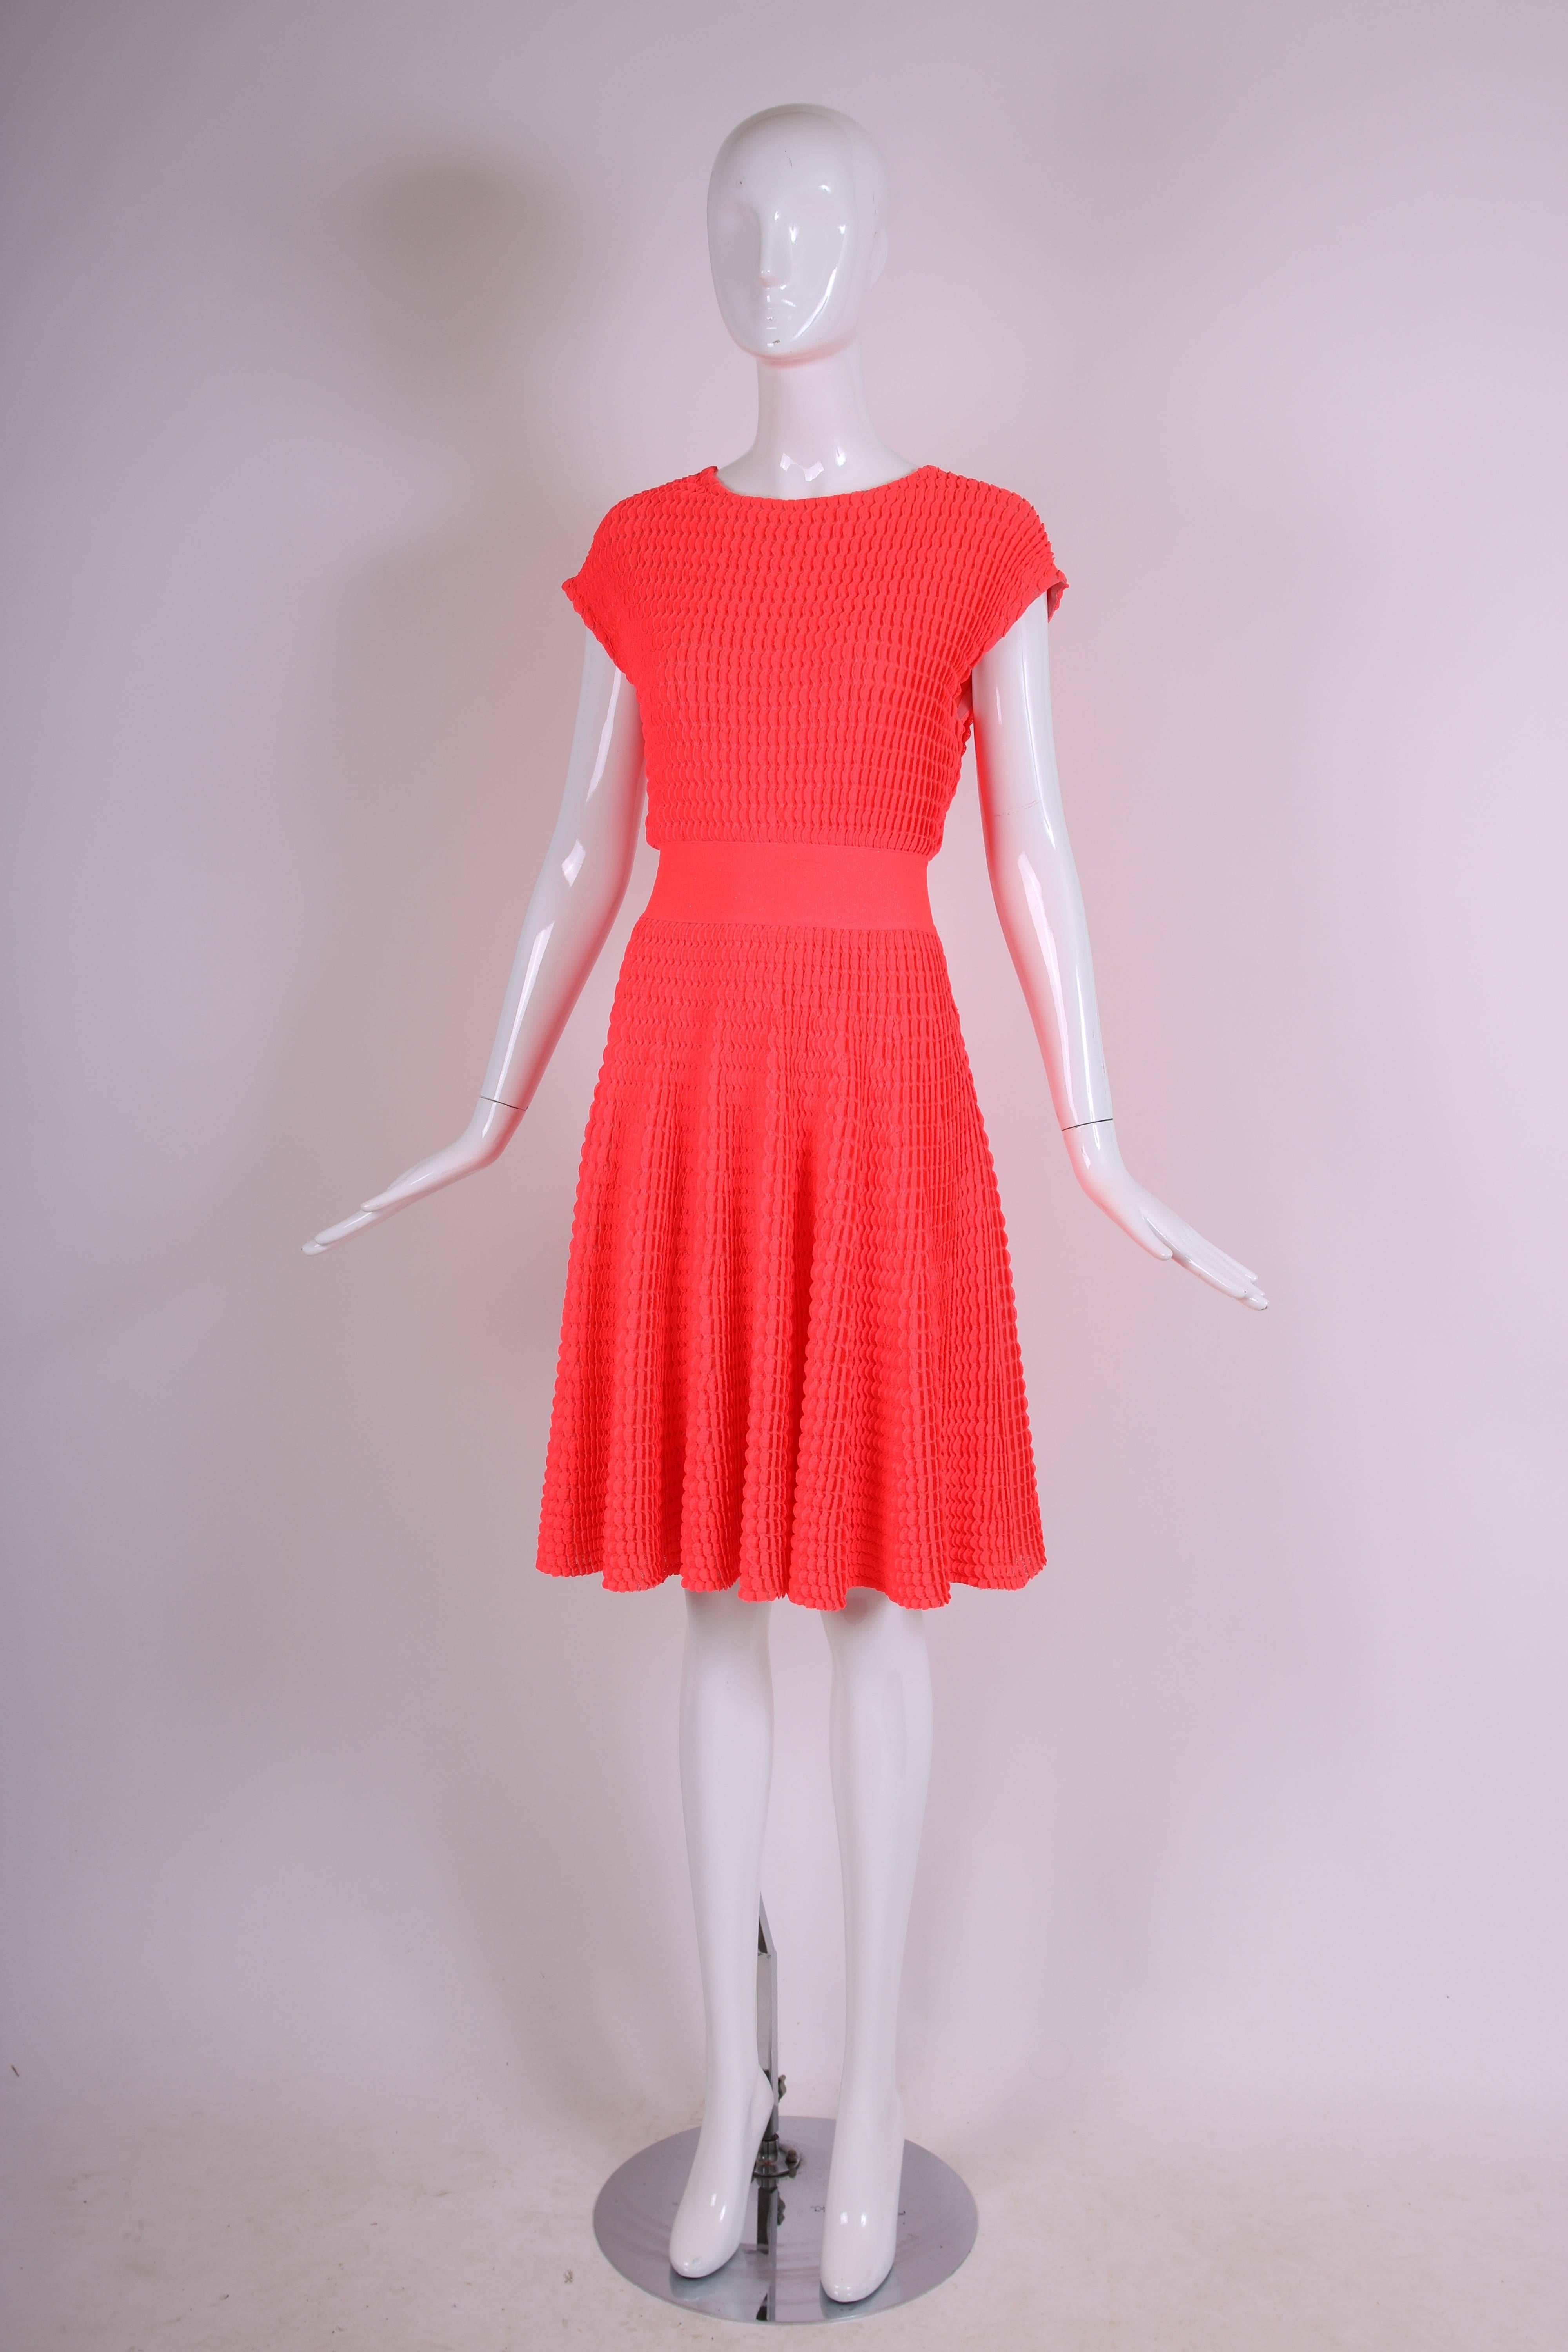 2013 Christian Dior by Raf Simons Neon Pink Textured Stretch Cocktail Day Dress In Excellent Condition In Studio City, CA